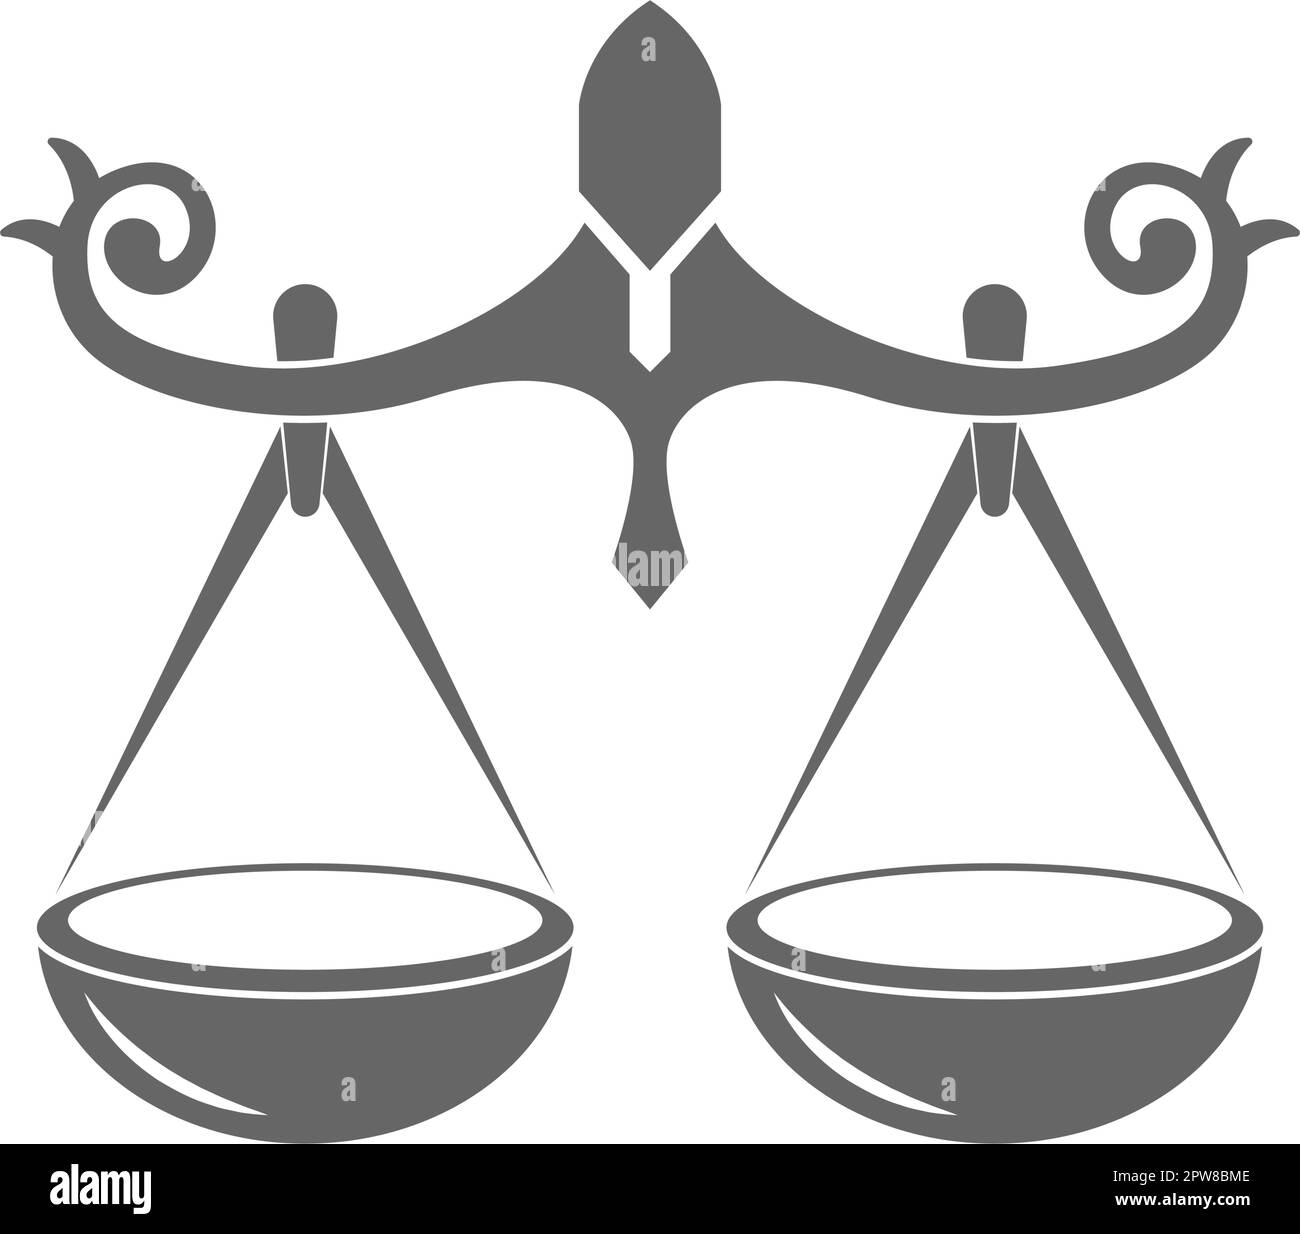 Libra scale Black and White Stock Photos & Images - Alamy